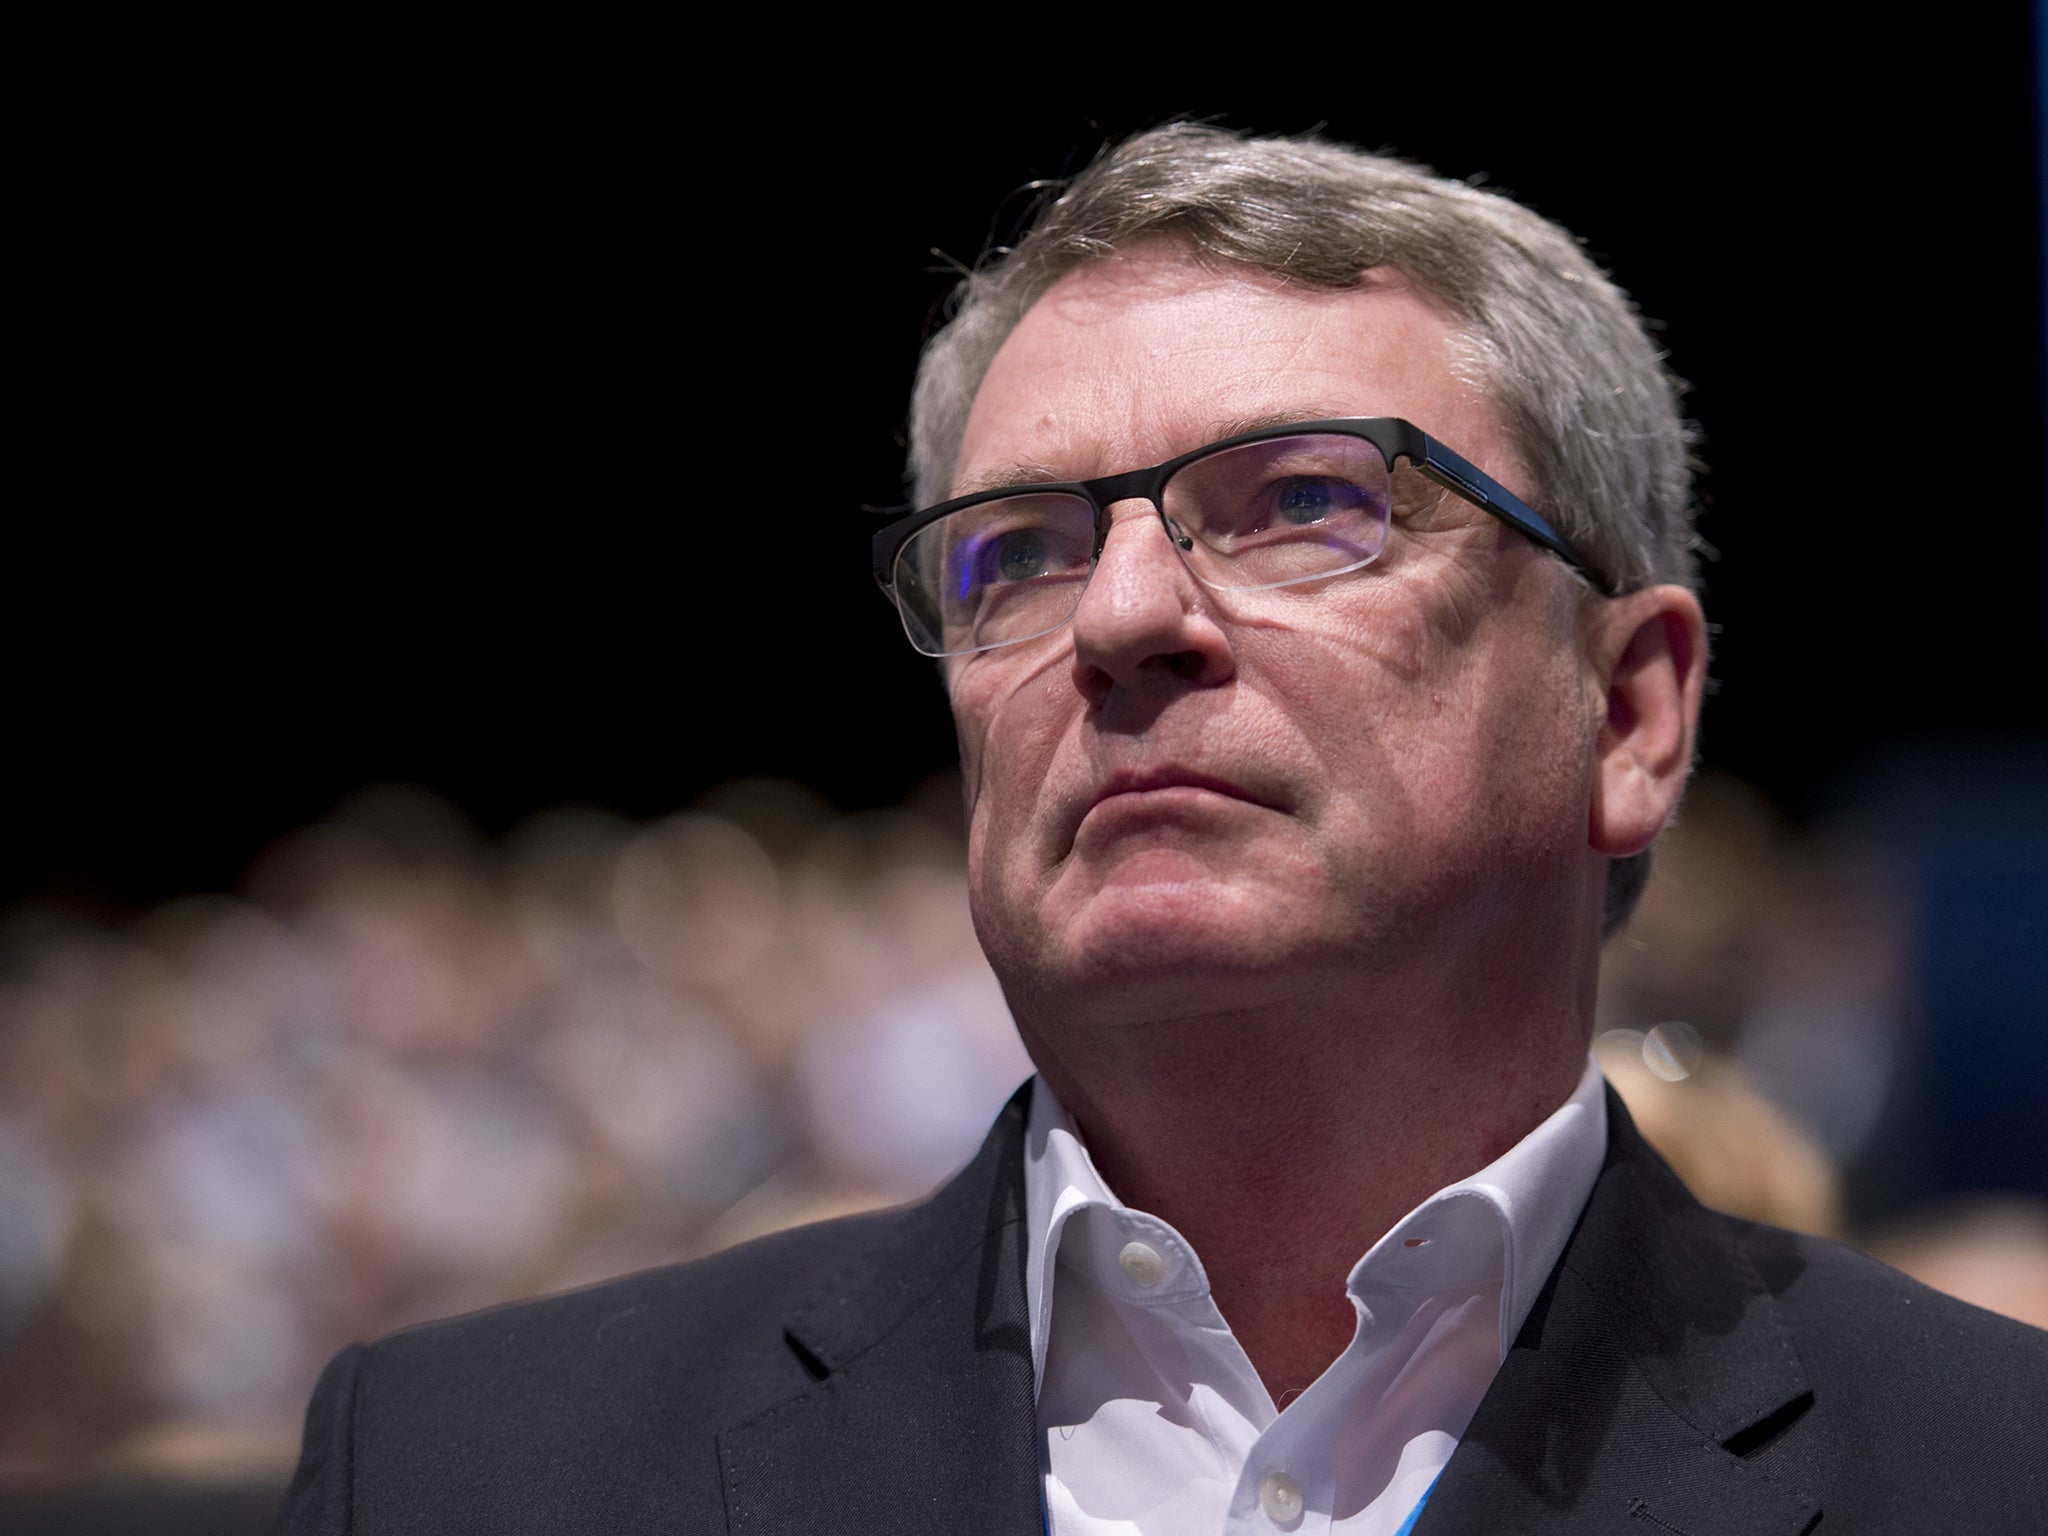 Lynton Crosby is expected to be knighted in the New Year